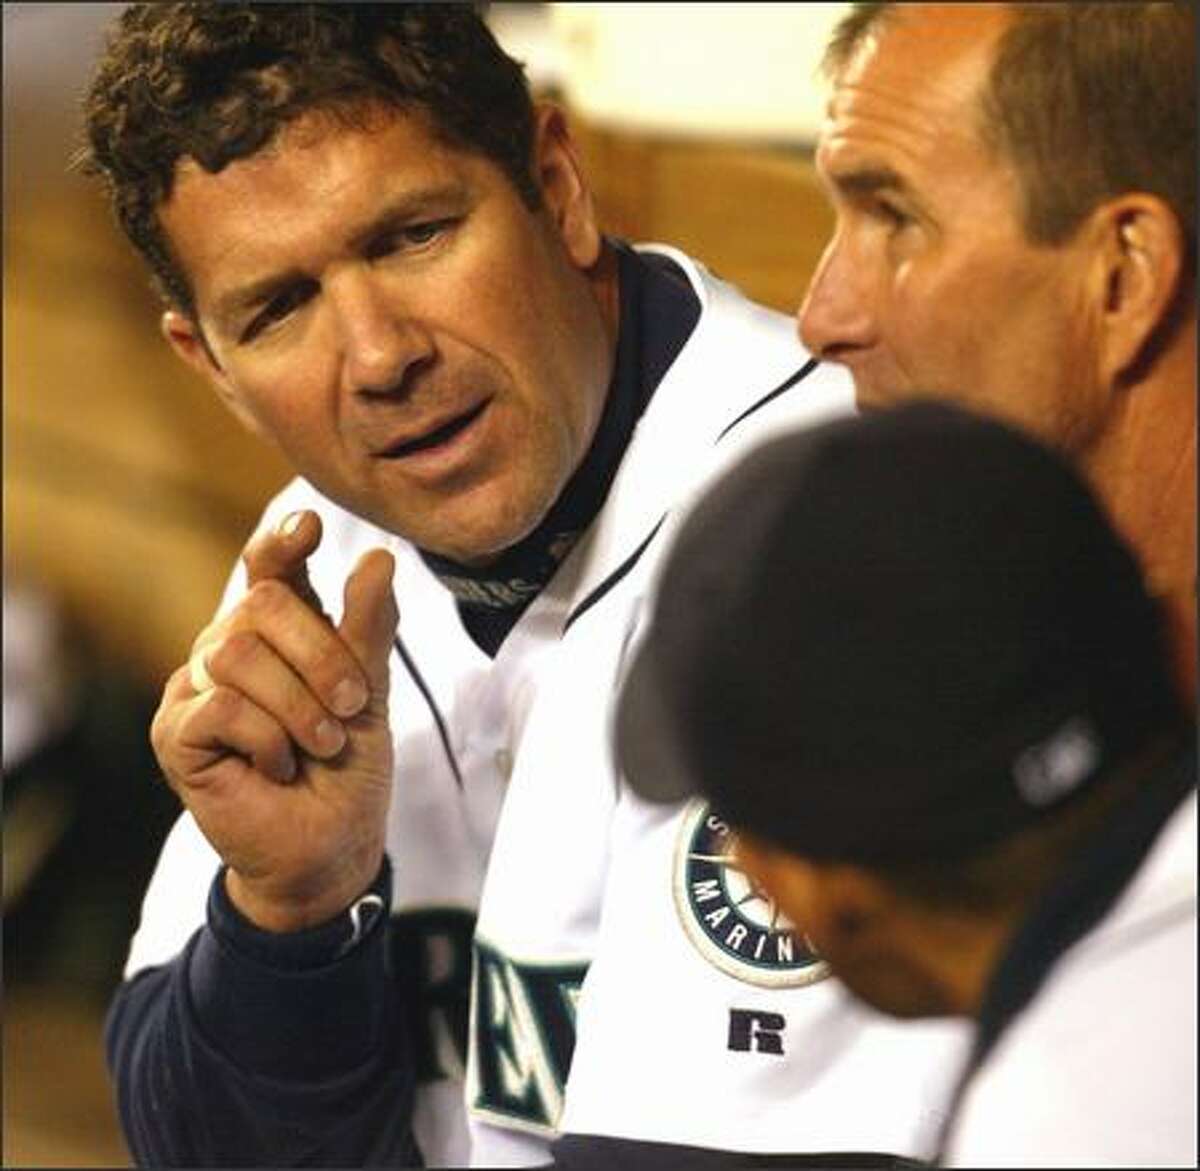 Mariners Edgar Martinez talks about his double after being pulled out of game for a pinch runner against the Oakland Athletics on April 15, 2003.